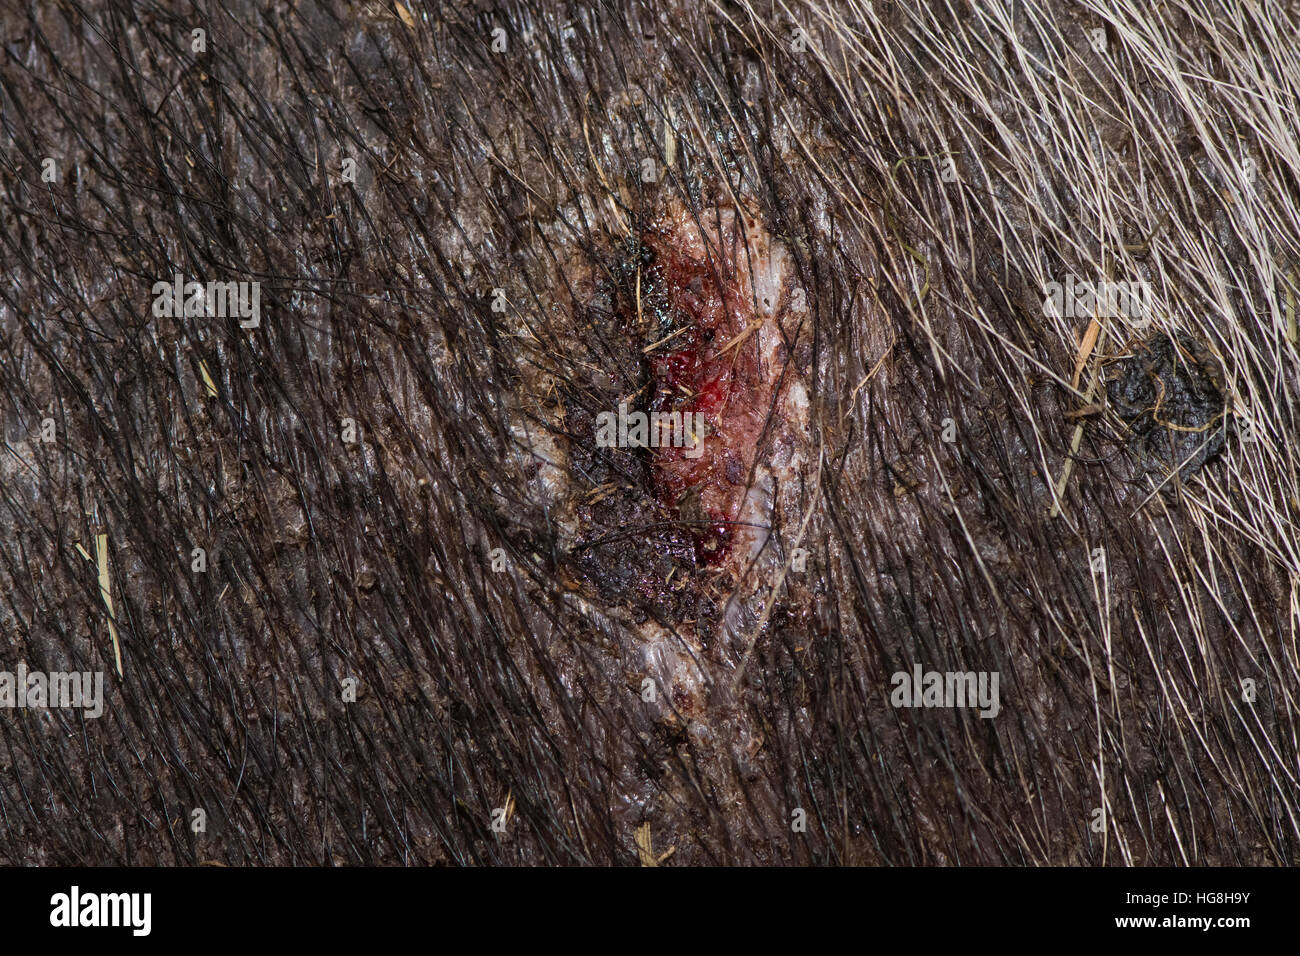 Wound on skin of pig from fighting. Open sore on skin of pig as a result of bite from animals kept together Stock Photo